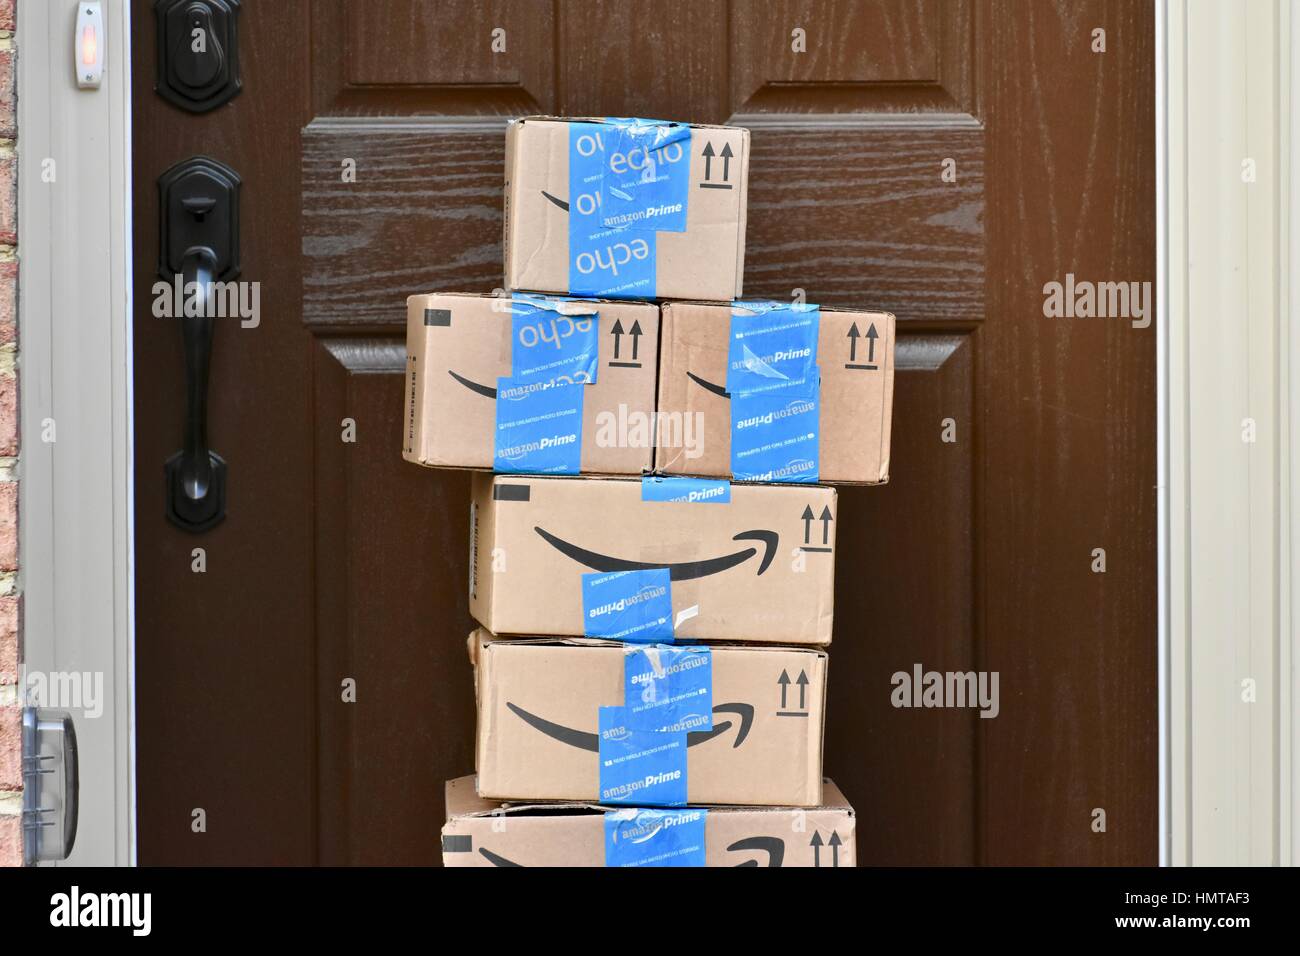 Amazon Prime packages delivered to a residential home Stock Photo